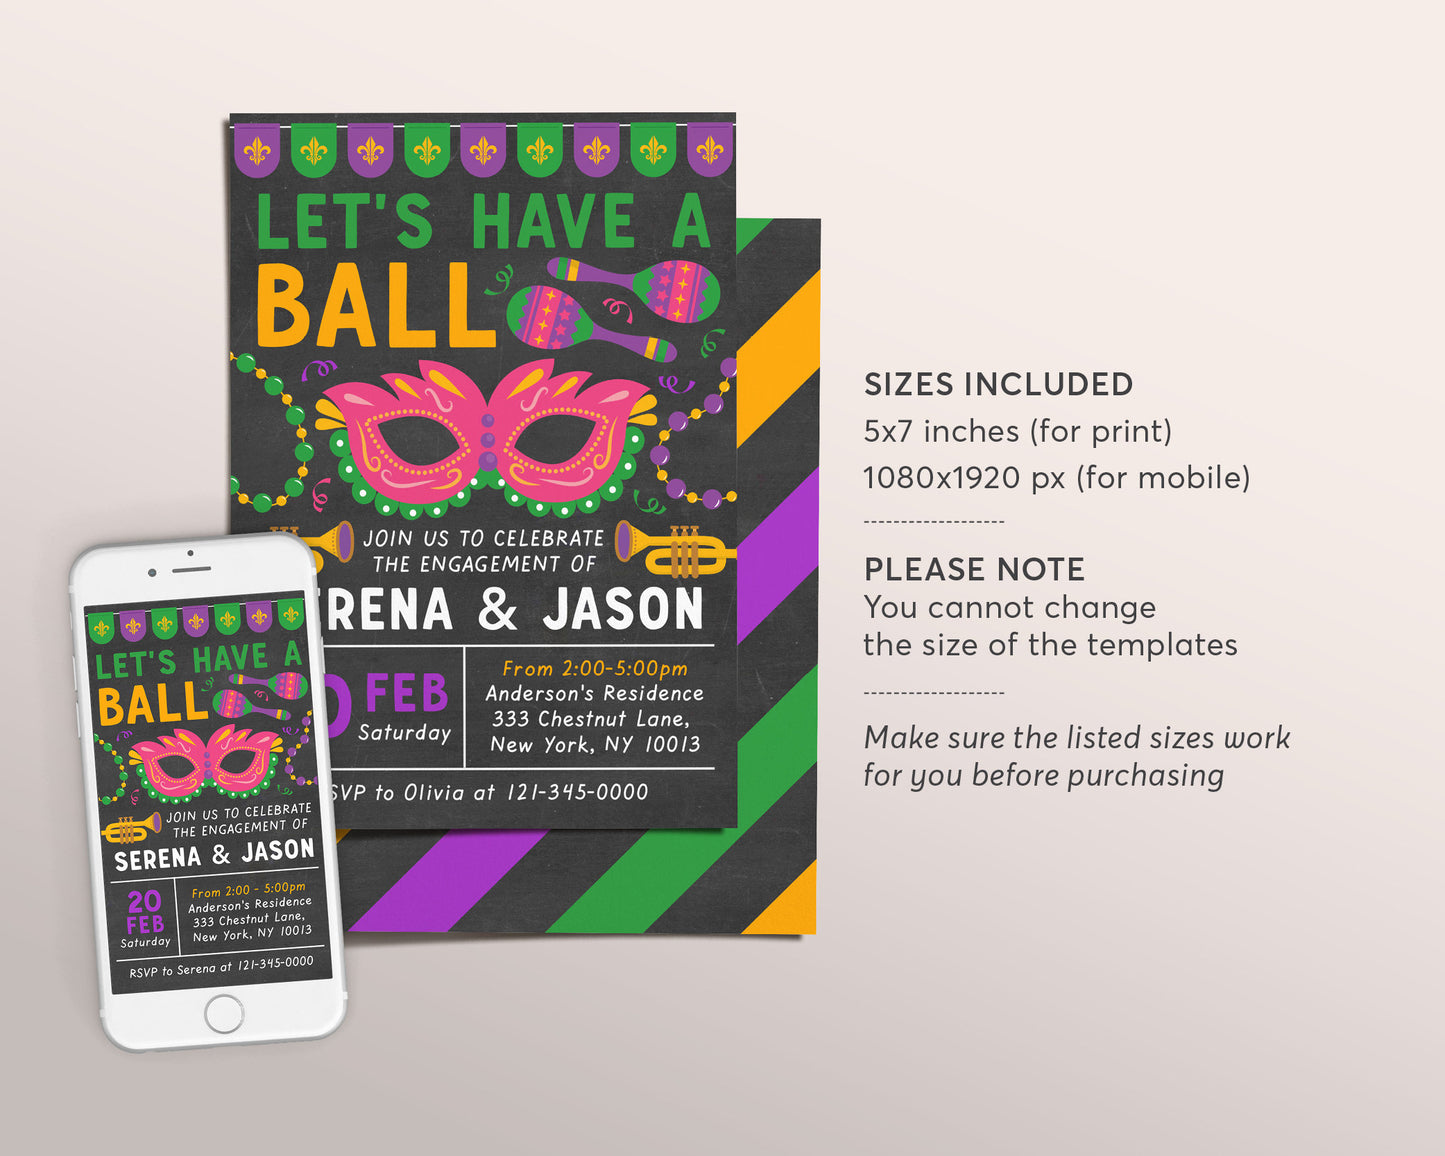 Mardi Gras Engagement Couples Shower Party Invitation Editable Template, Lets Have A Ball Bridal Shower Invite, Fat Tuesday Masquerade Ball